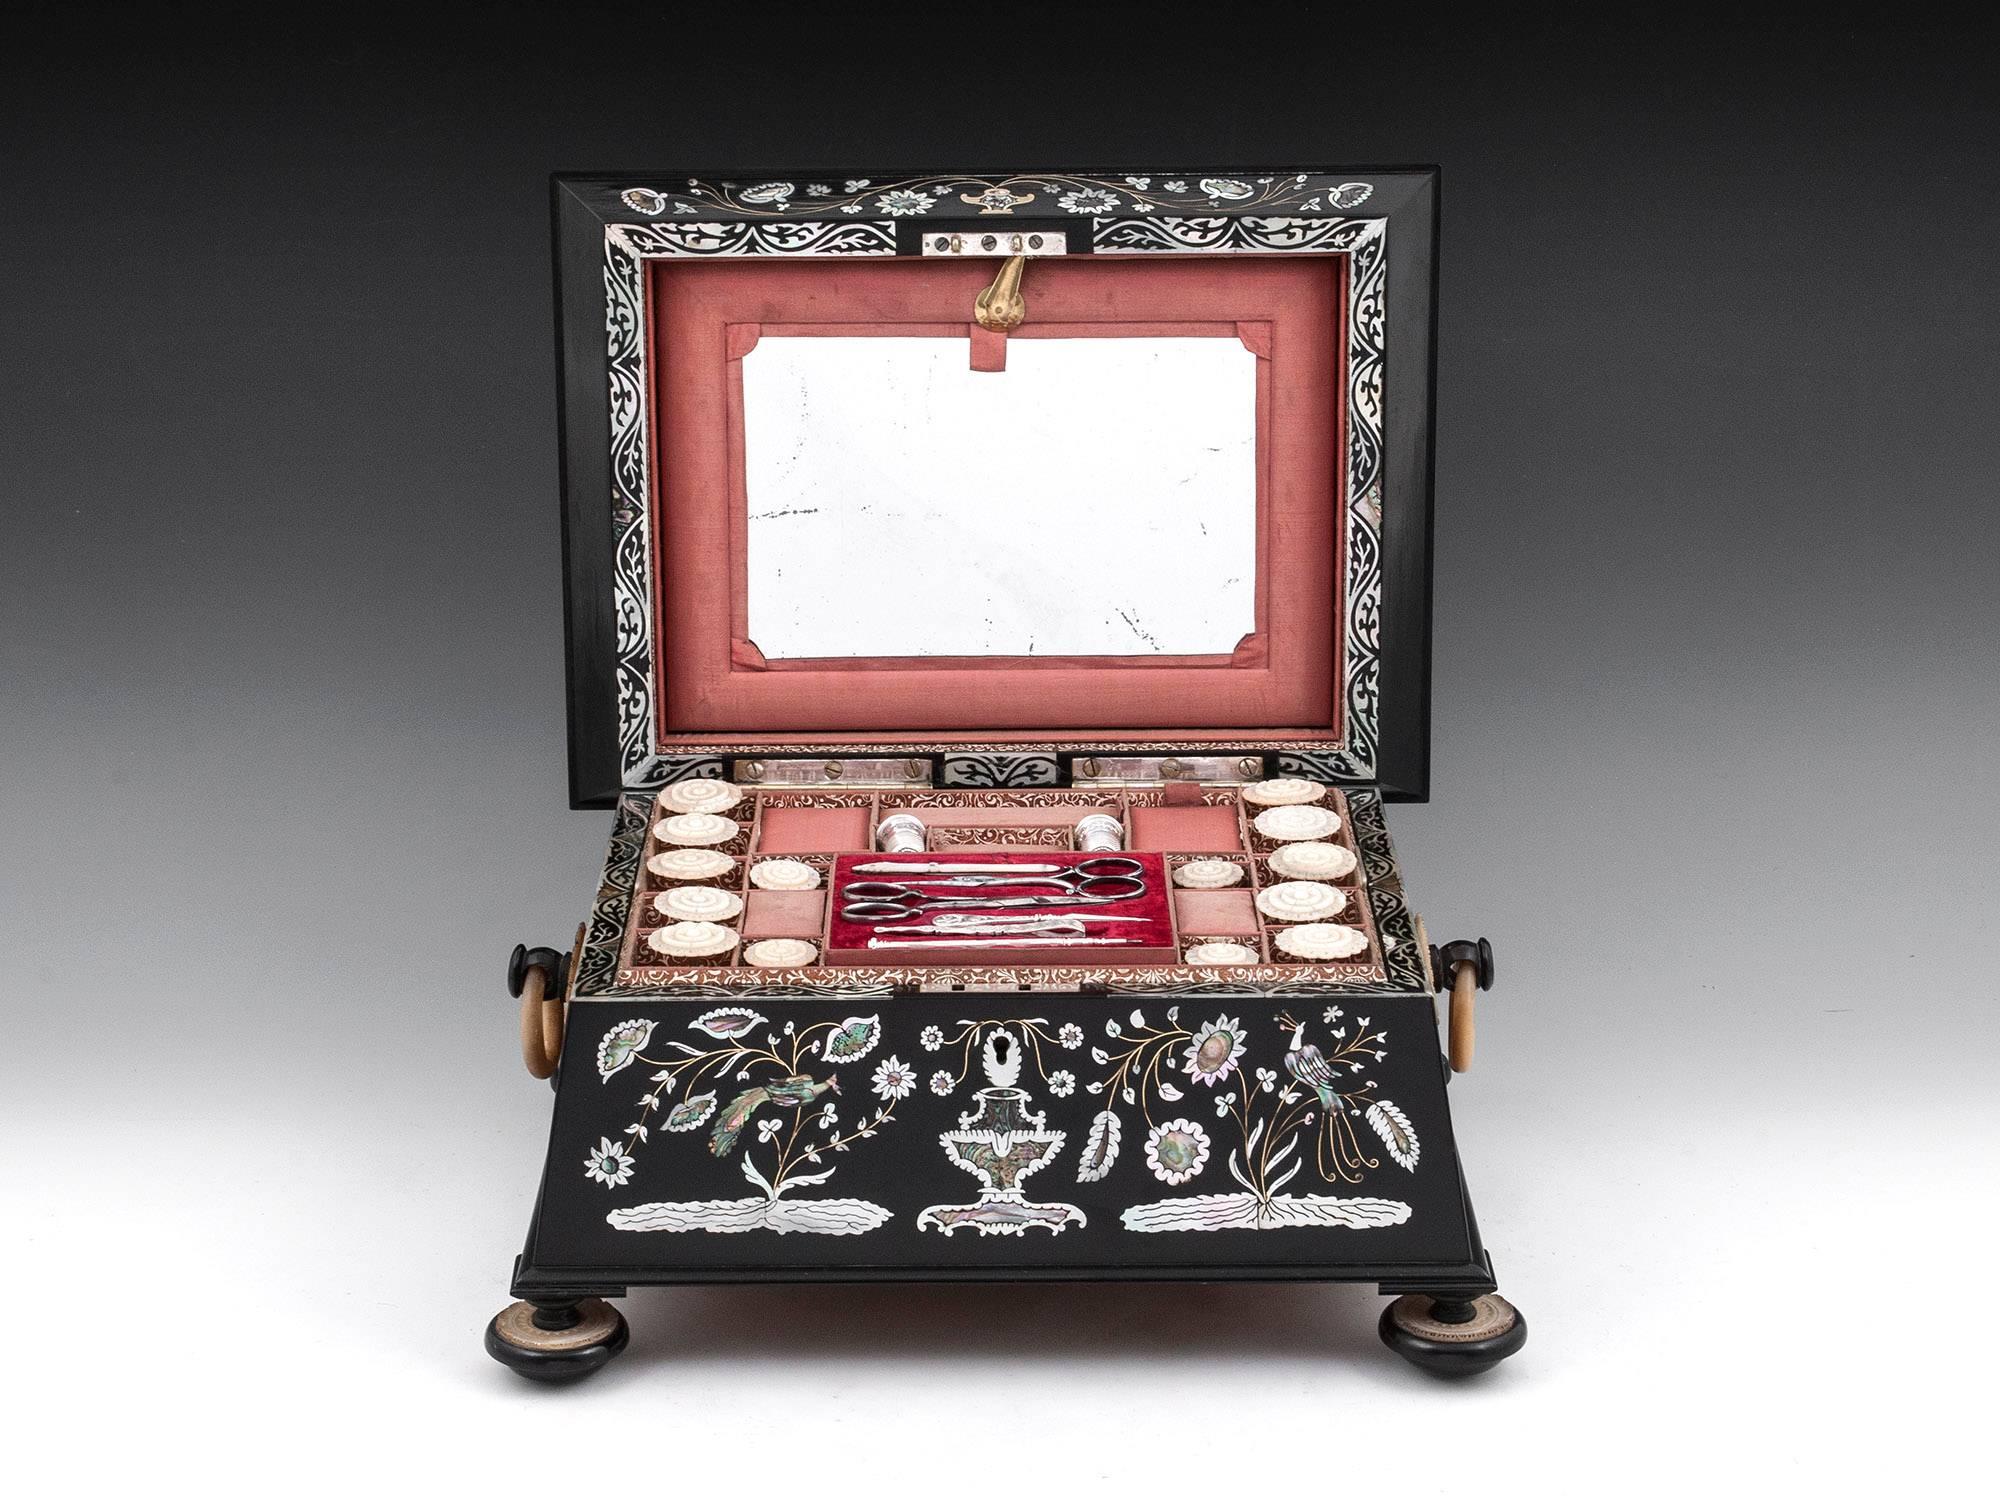 Mother-of-Pearl Austin of Dublin Ebony Mother of Pearl Sewing Box, 19th Century